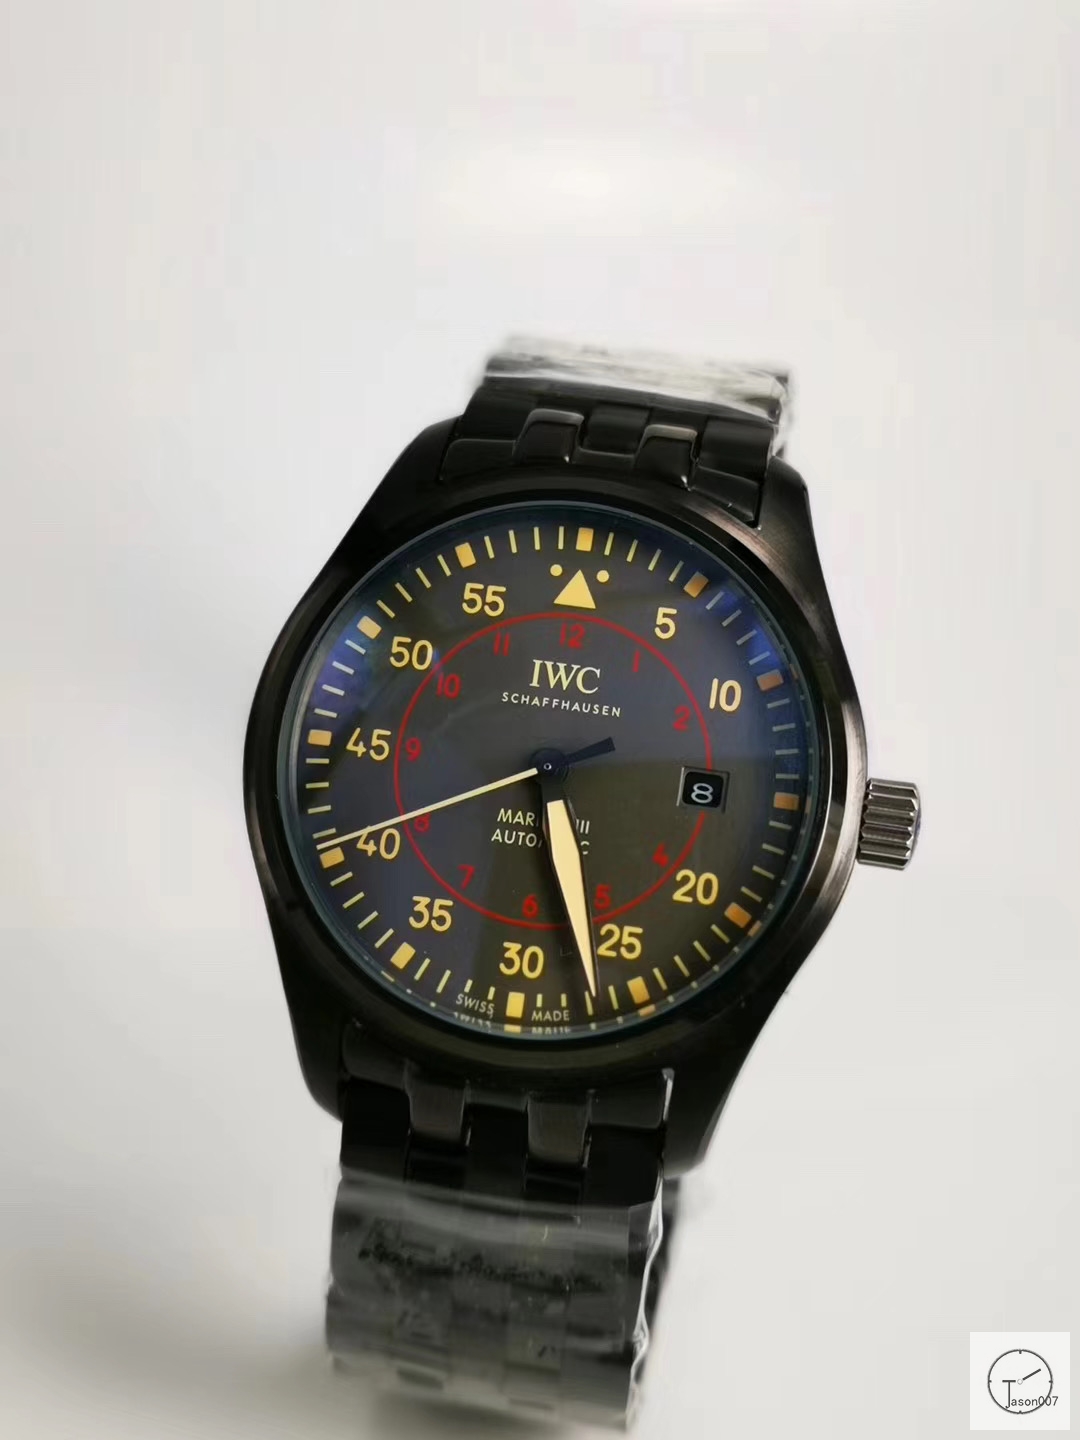 IWC PILOT'S SCHAFFHAUSEN Blue Dial SPITFIRE Mark XV2 WATCH AUTOMATIC SPITFIRE AUTOMATIC Mechical IW326801 42MM Stainless Steel Leather Strap Mens Wristwatches ICW22650560